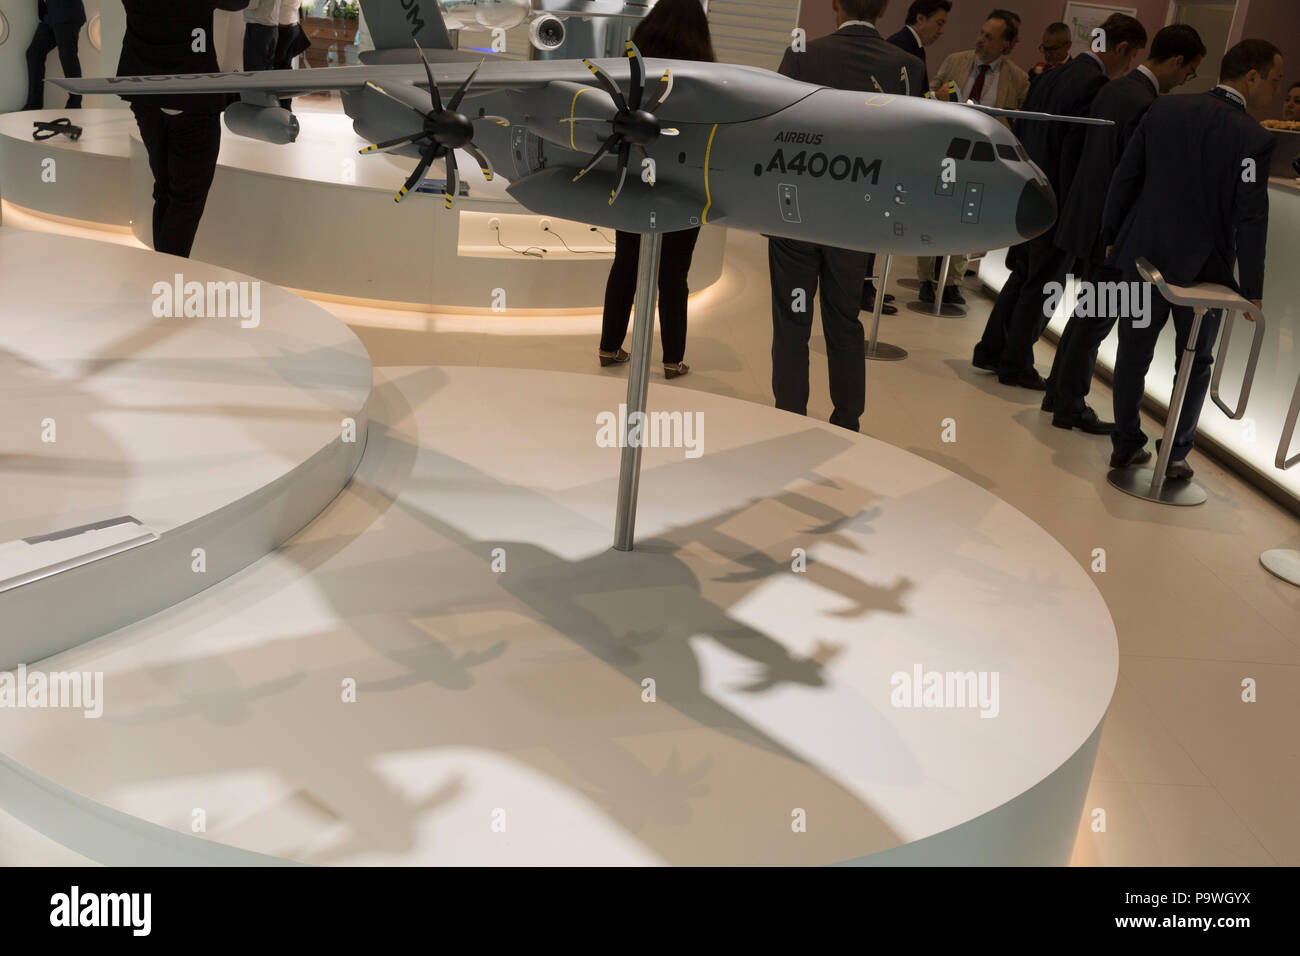 A scale model of the Airbus A400-M transporter aircraft in the company's hospitality chalet at the Farnborough Airshow, on 18th July 2018, in Farnborough, England. Stock Photo